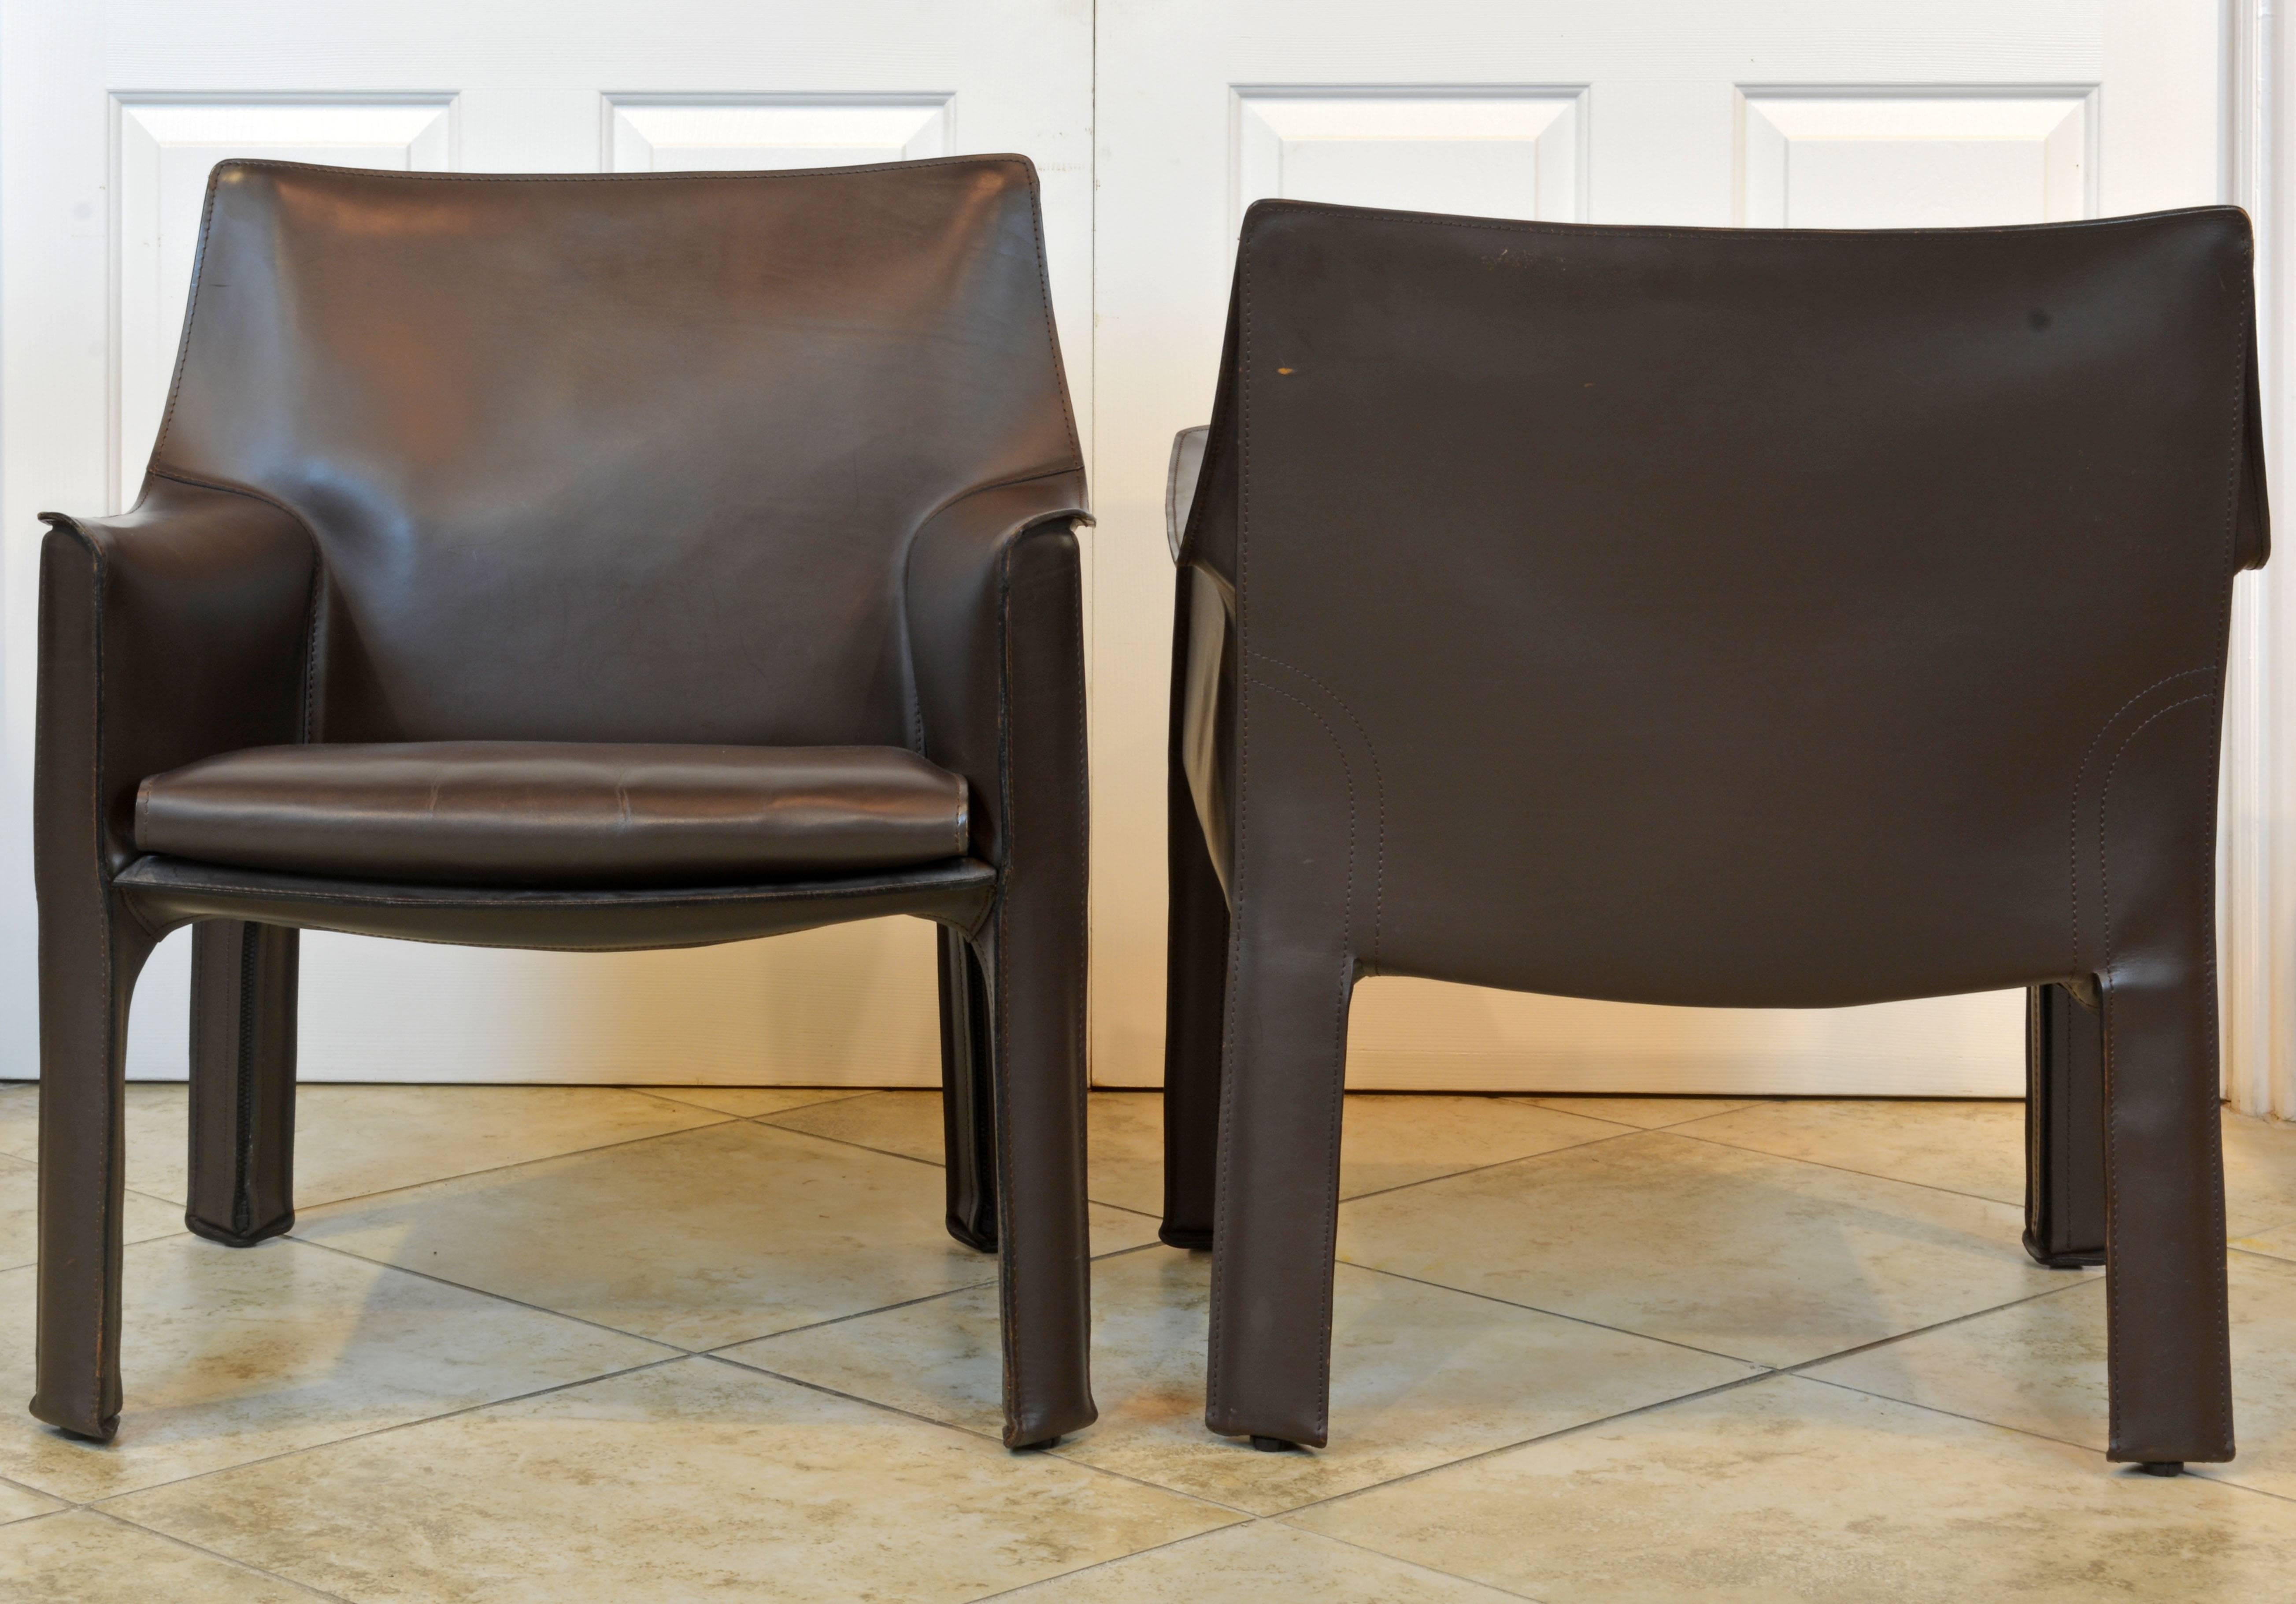 These iconic Mario Bellini leather cab lounge chairs by Cassina are constructed with a steel frame totally covered in 1st grade mocha tanned leather in good condition. The chairs are branded as shown on photos. Please note that we have a love seat